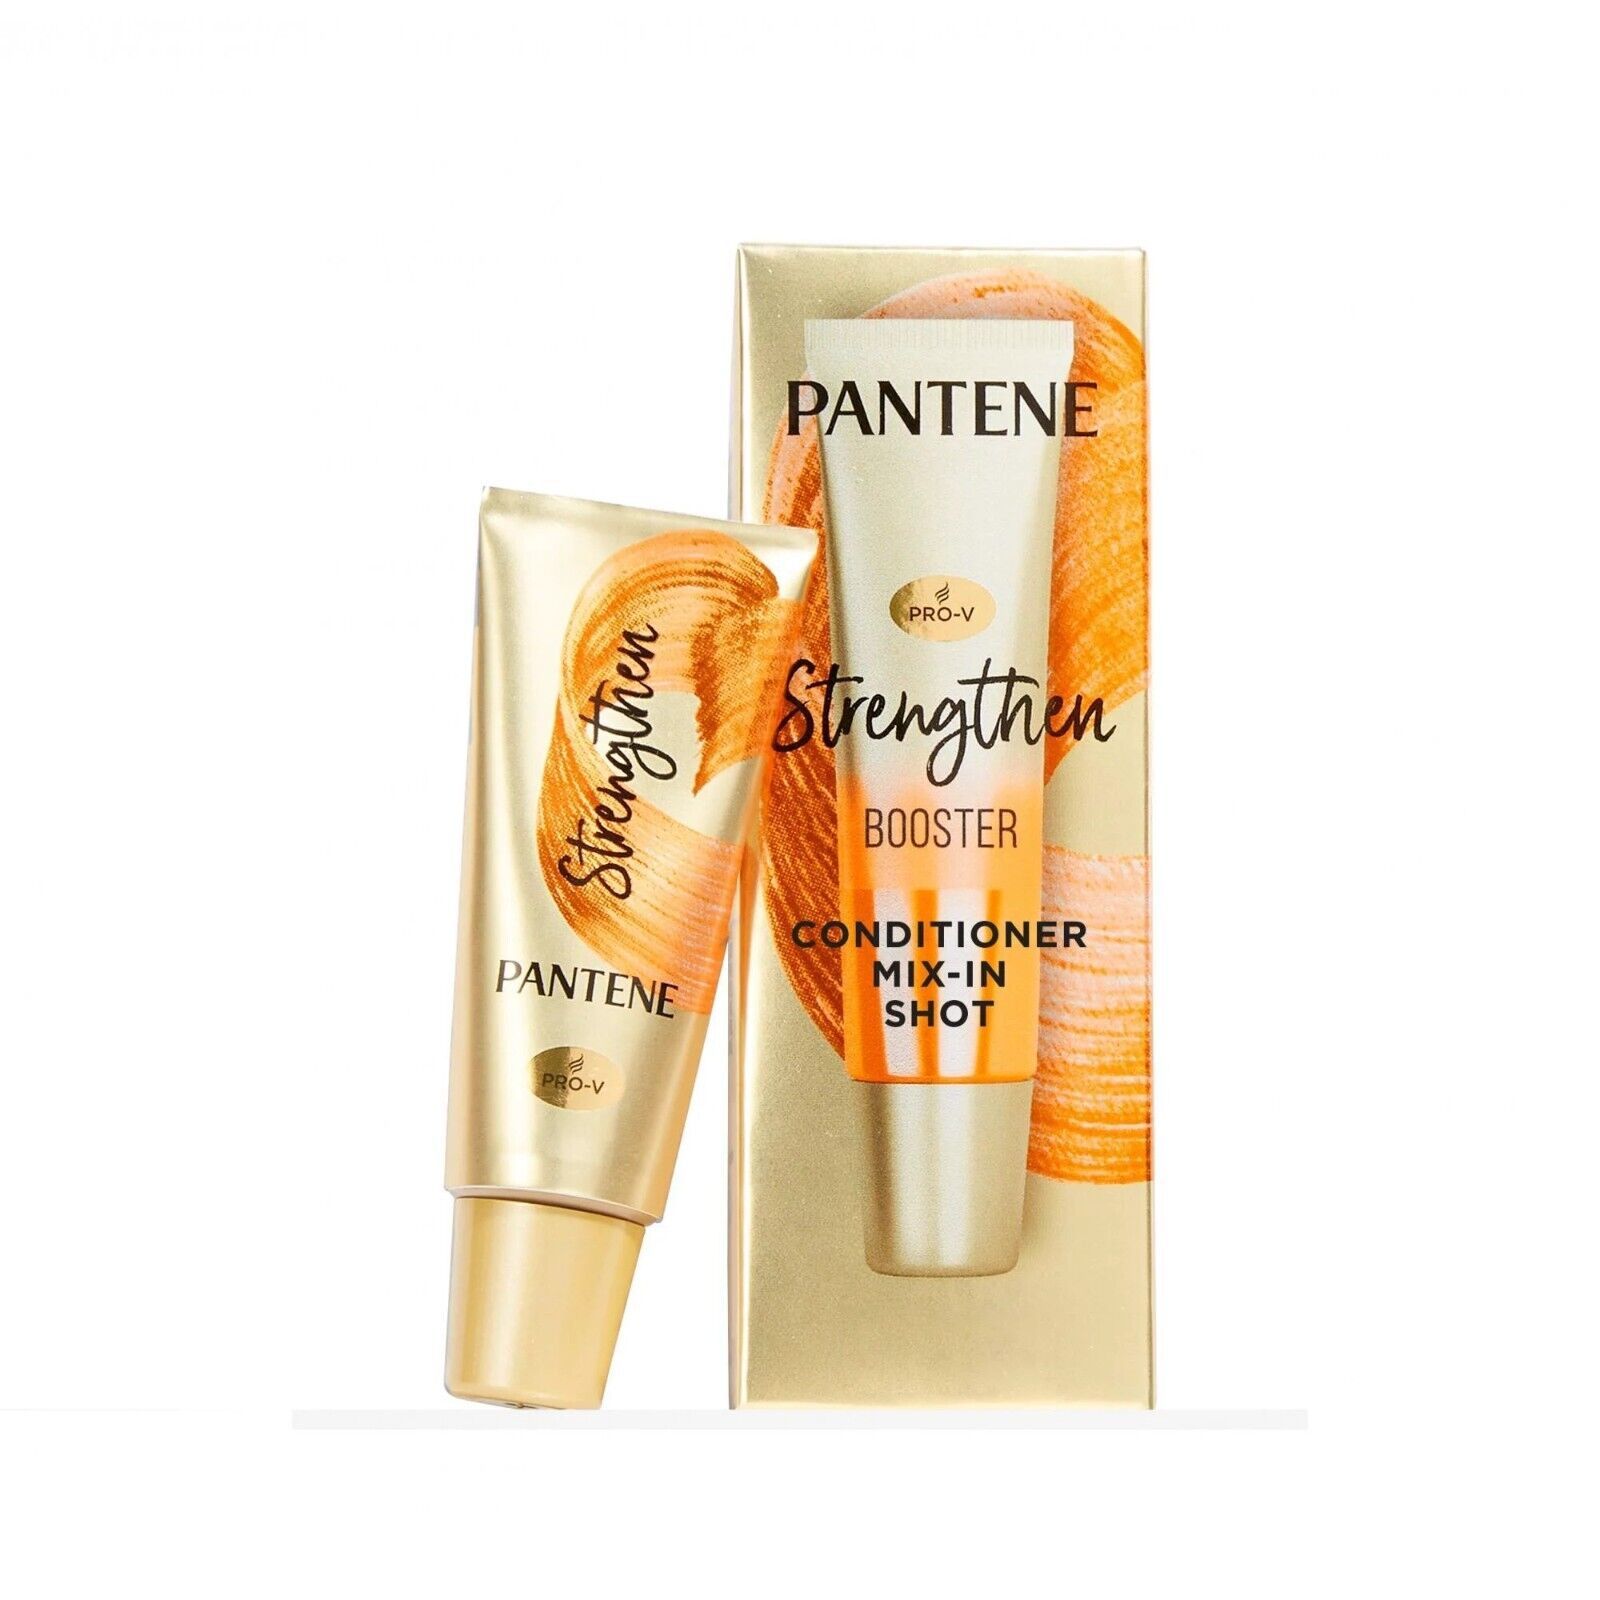 Primary image for Pantene Pro V Strengthen Booster Hair Conditioner Mix In Shot 0.5oz Lot Of 4 NEW